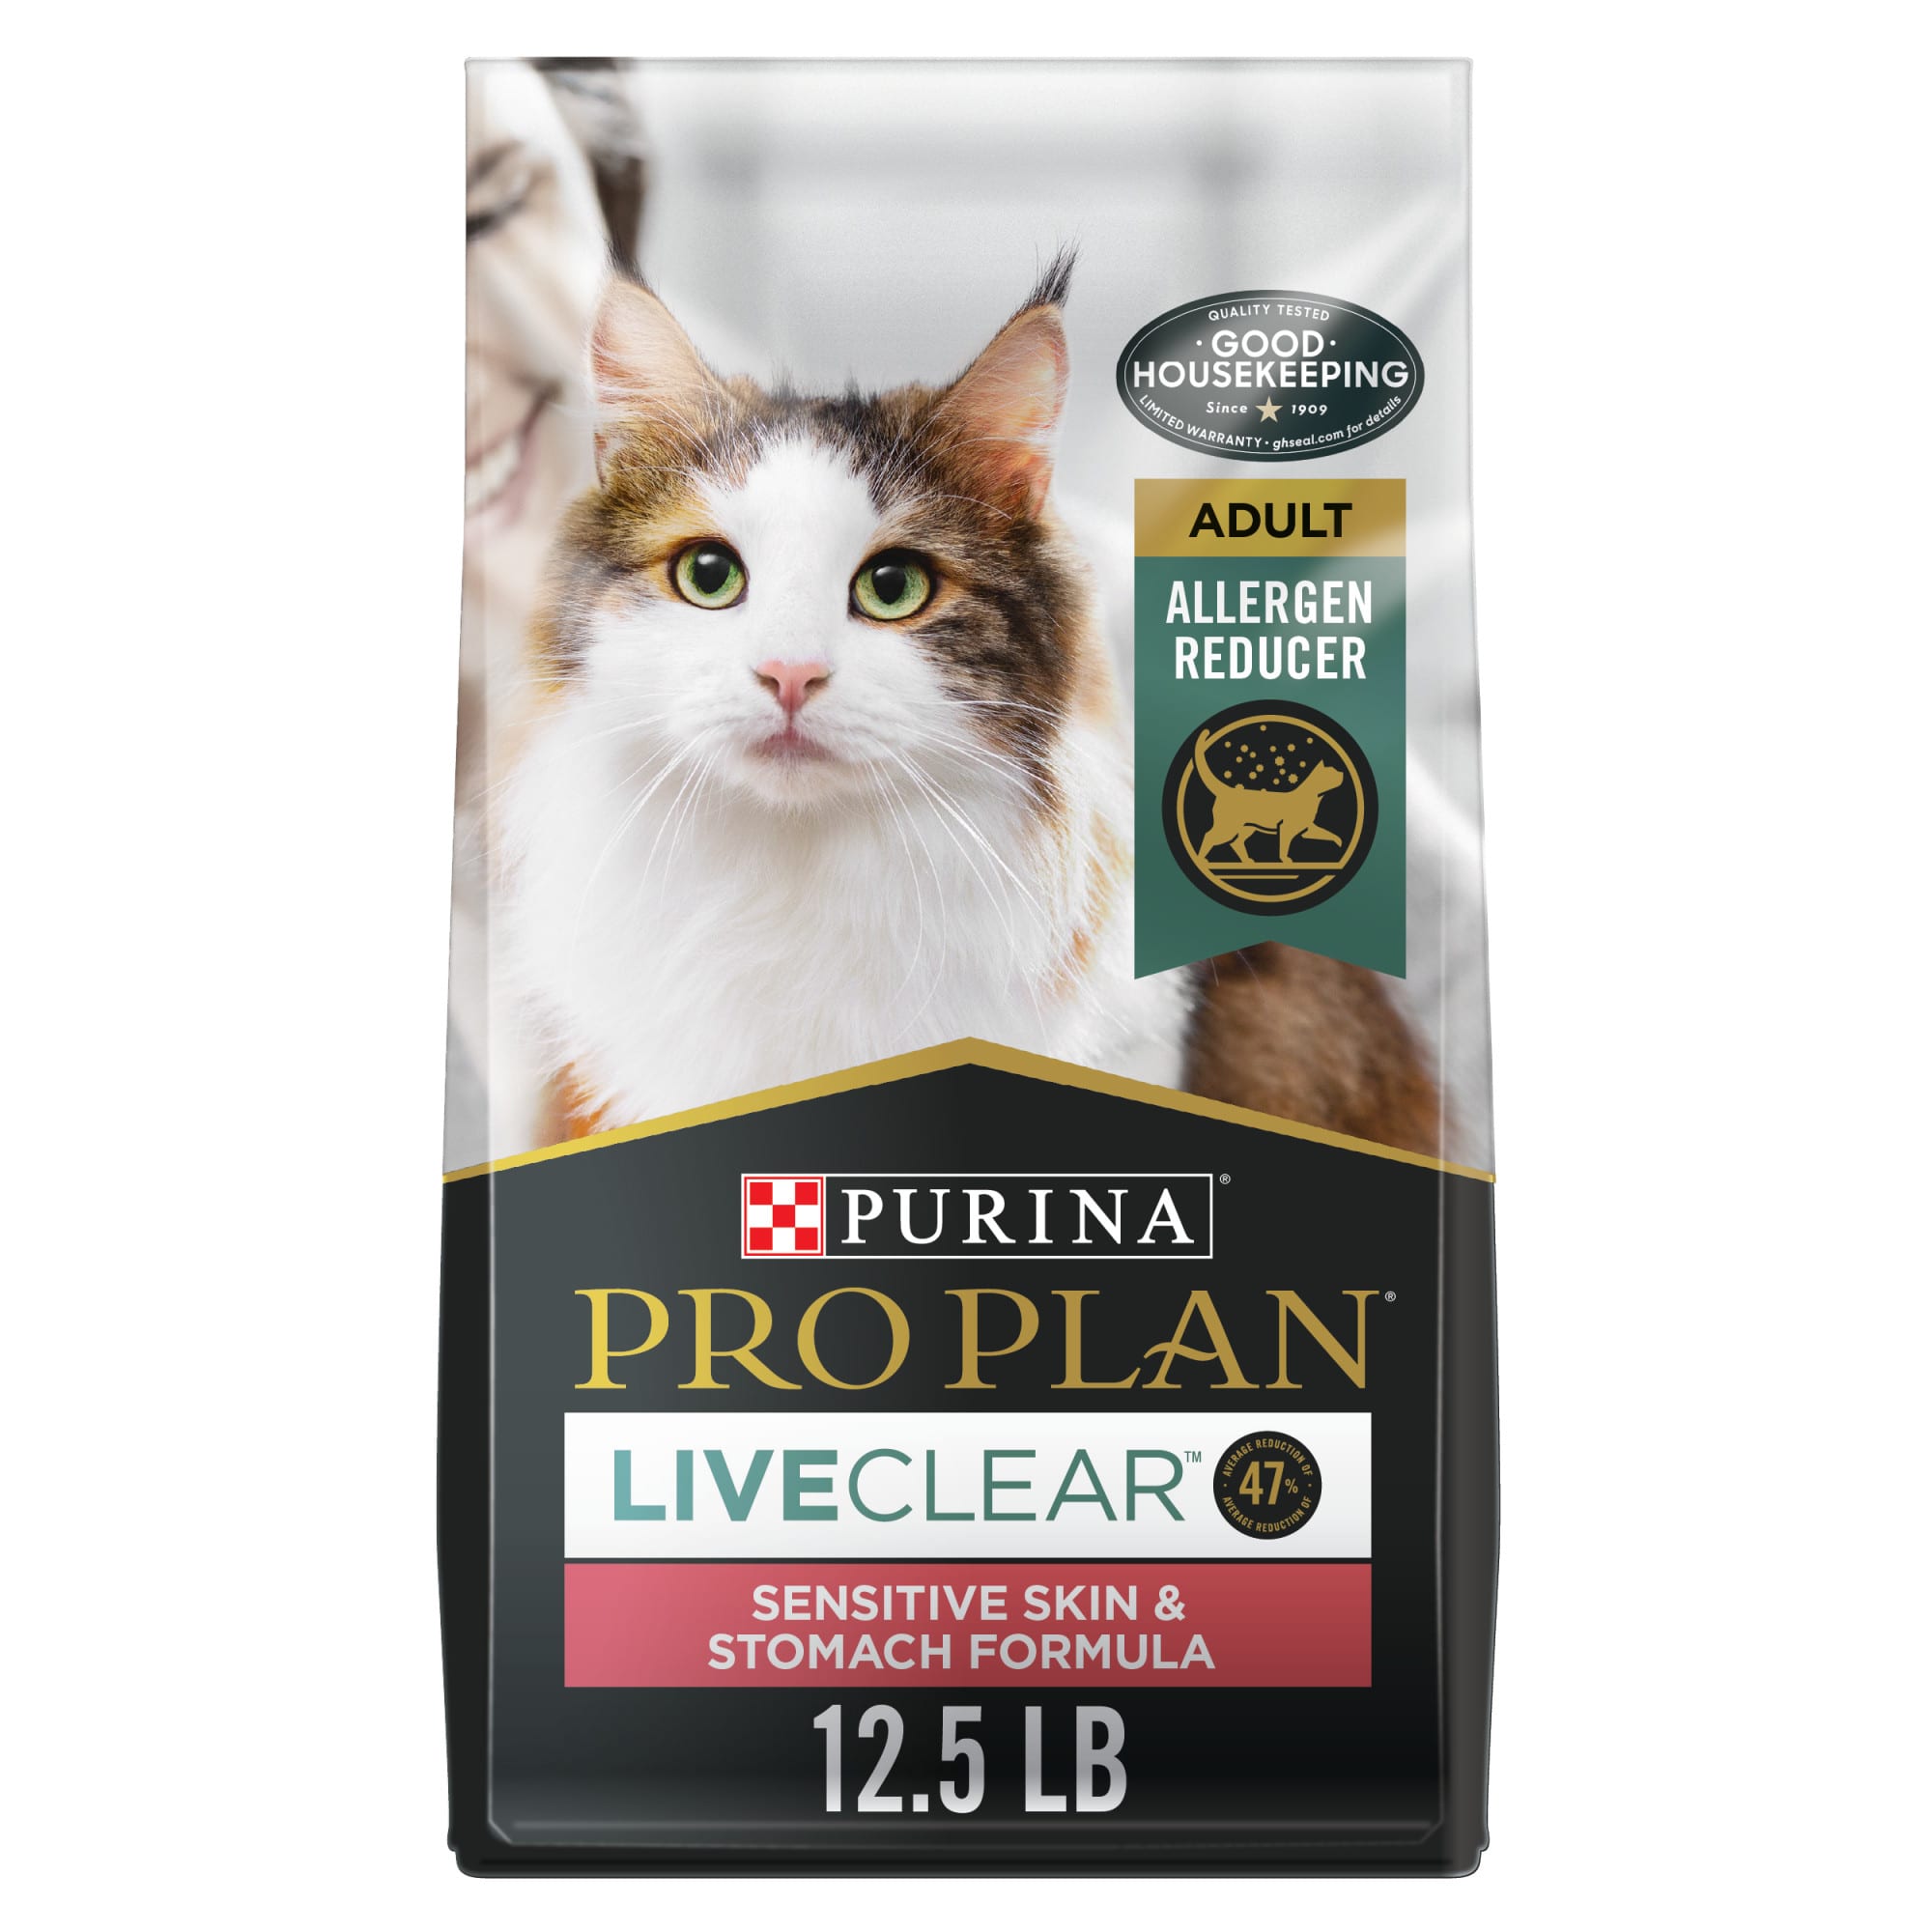 Purina Pro Plan Liveclear Sensitive Skin Stomach Turkey Oatmeal Dry Cat Food 12 5 Lbs Petco